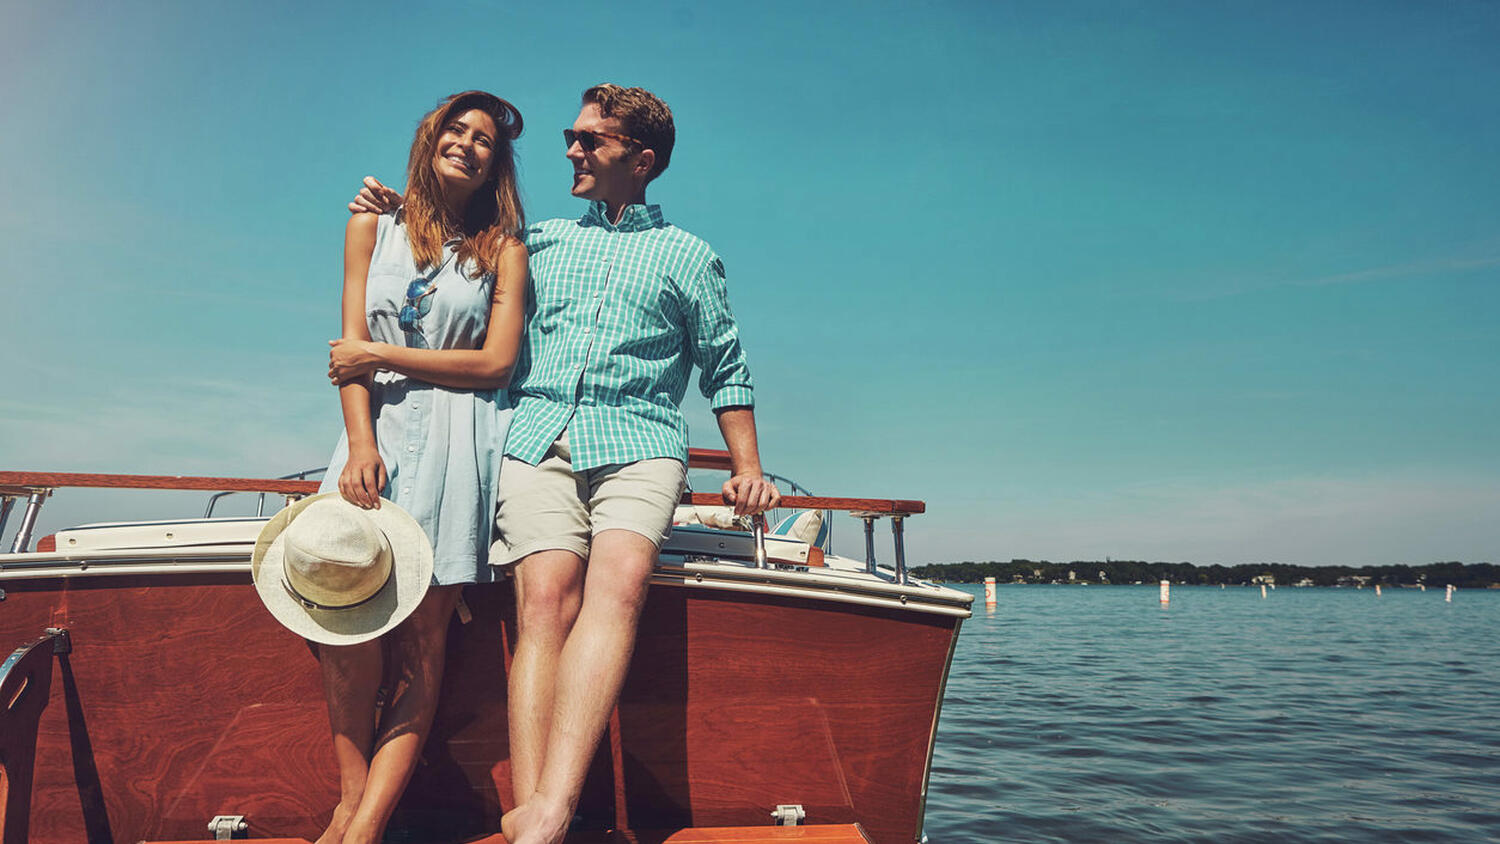 Man and a Woman Smiling on a Boat